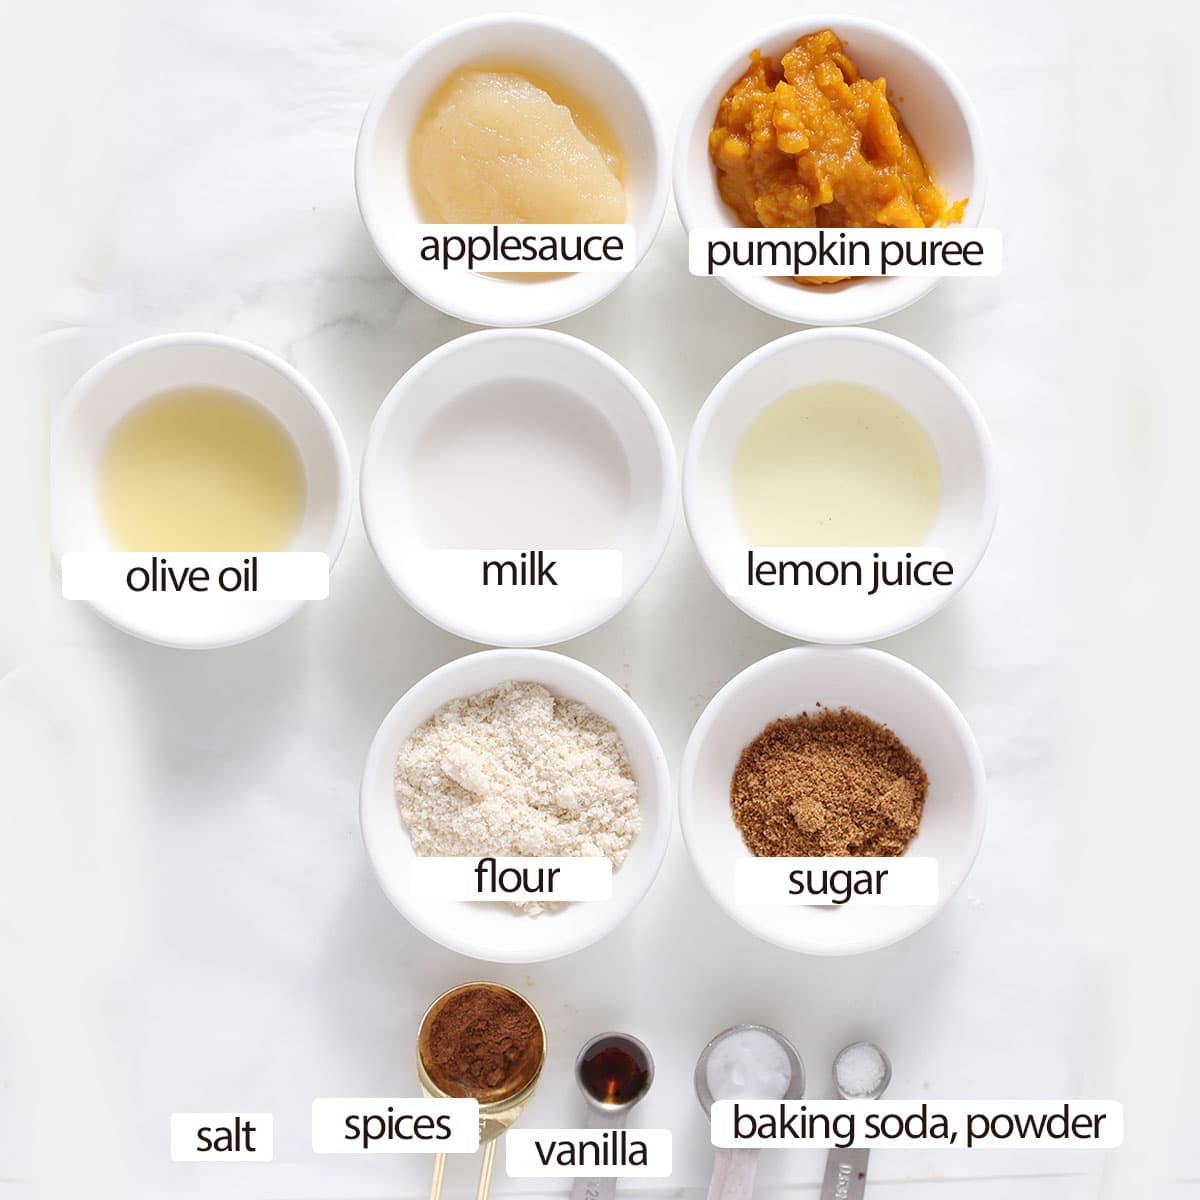 pumpkin muffin ingredients with labels.